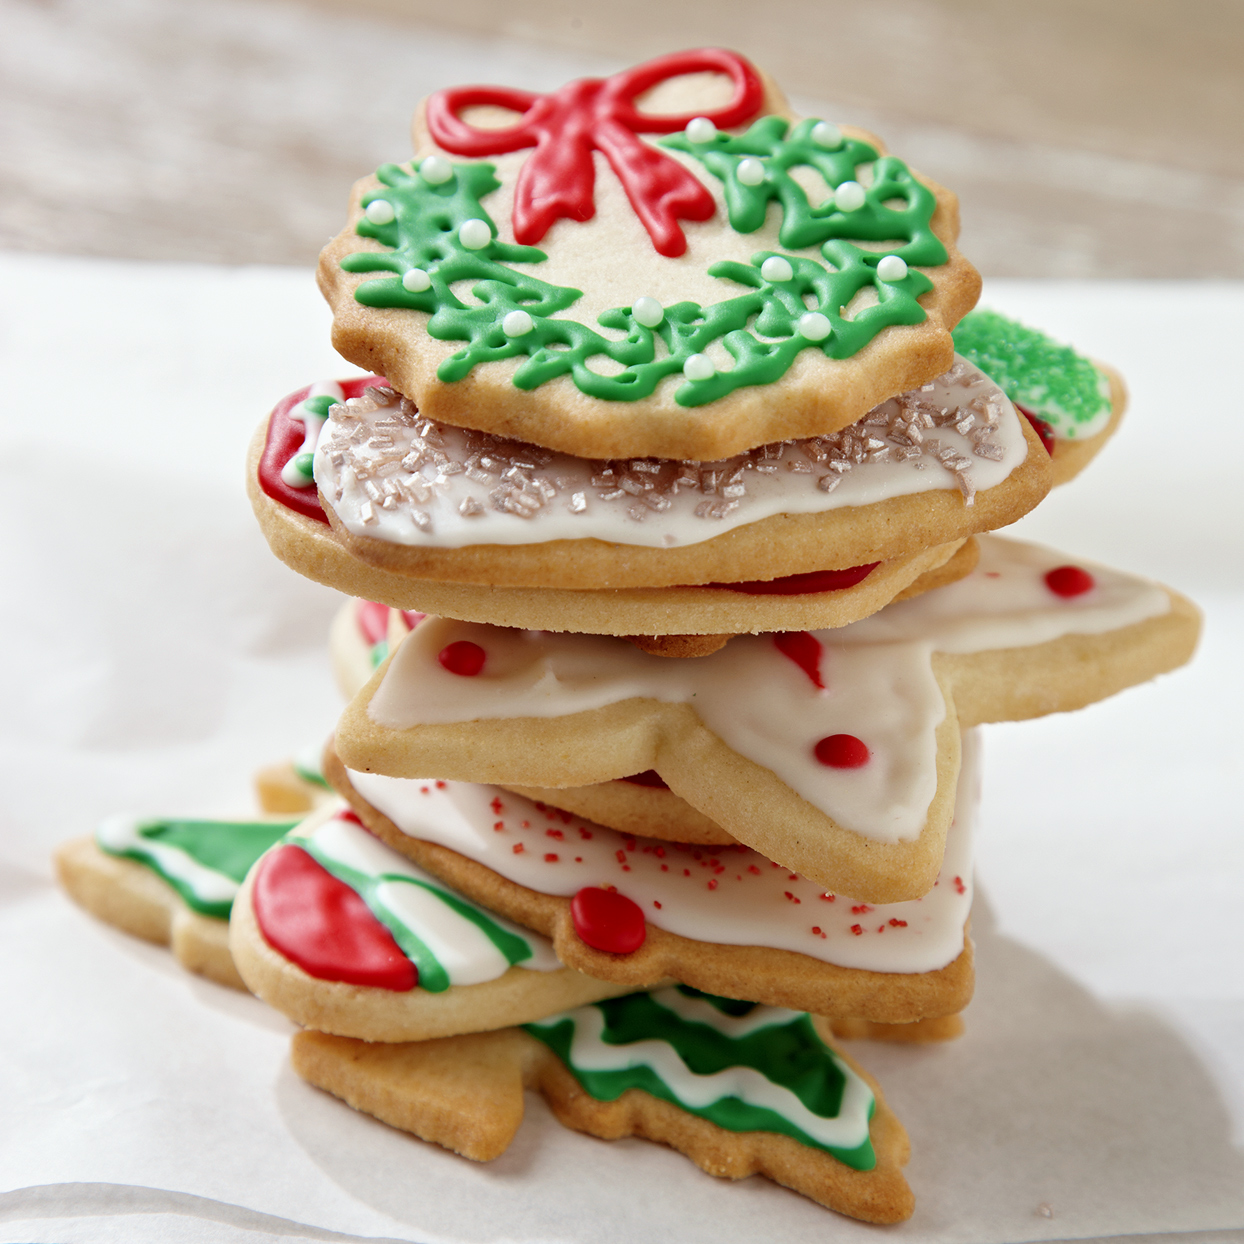 Frosted sugar cookies in a stack with a Christmas wreath cookie on top